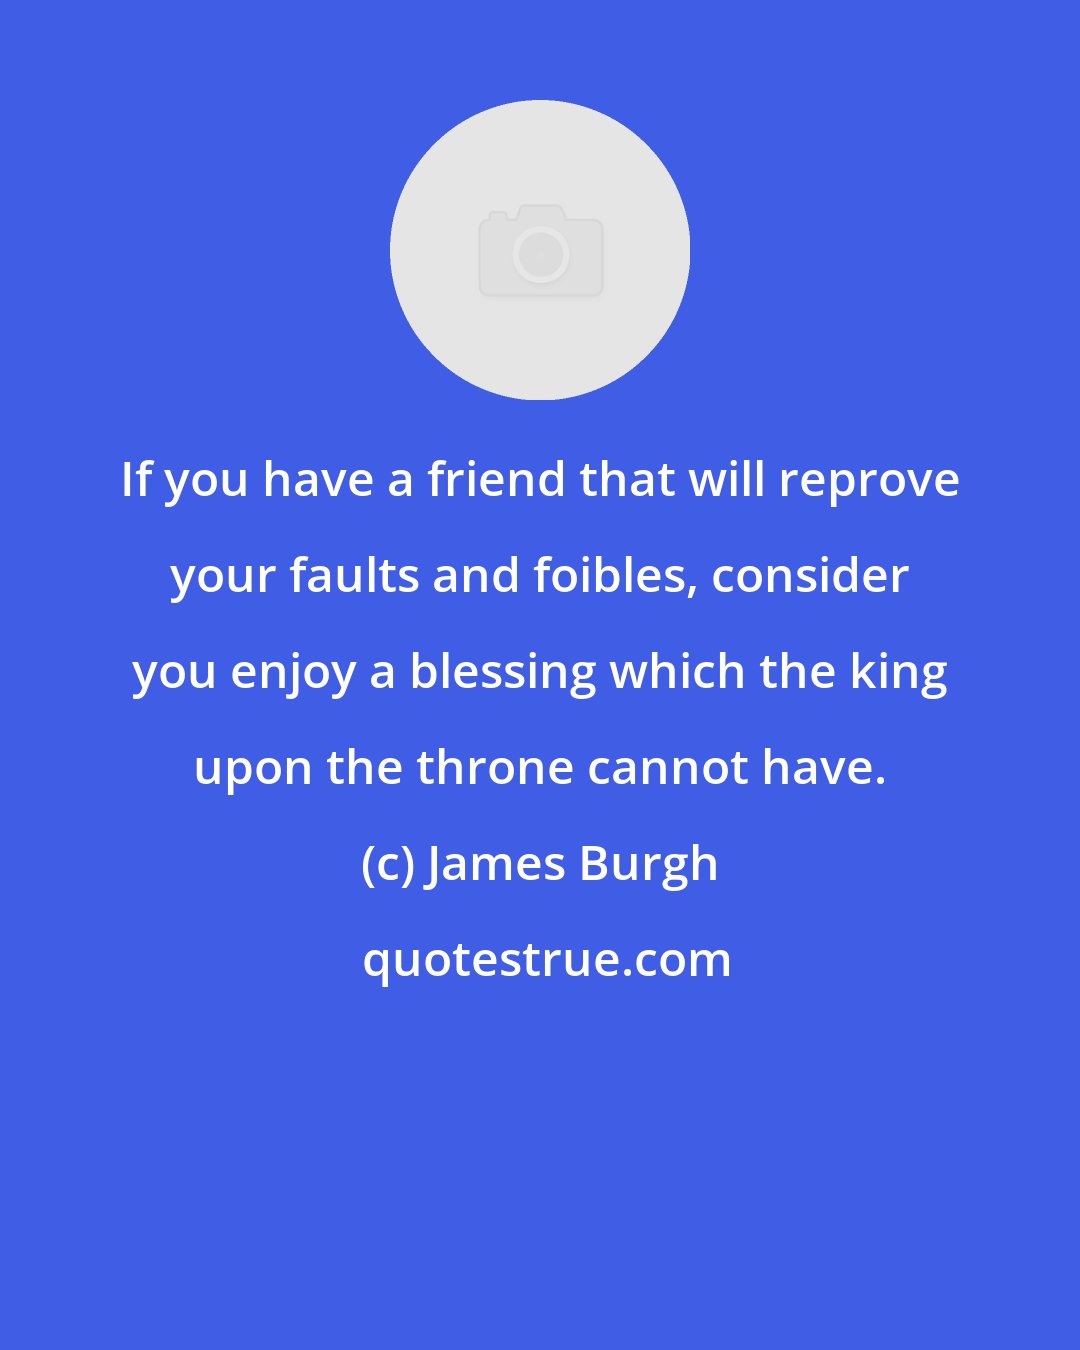 James Burgh: If you have a friend that will reprove your faults and foibles, consider you enjoy a blessing which the king upon the throne cannot have.